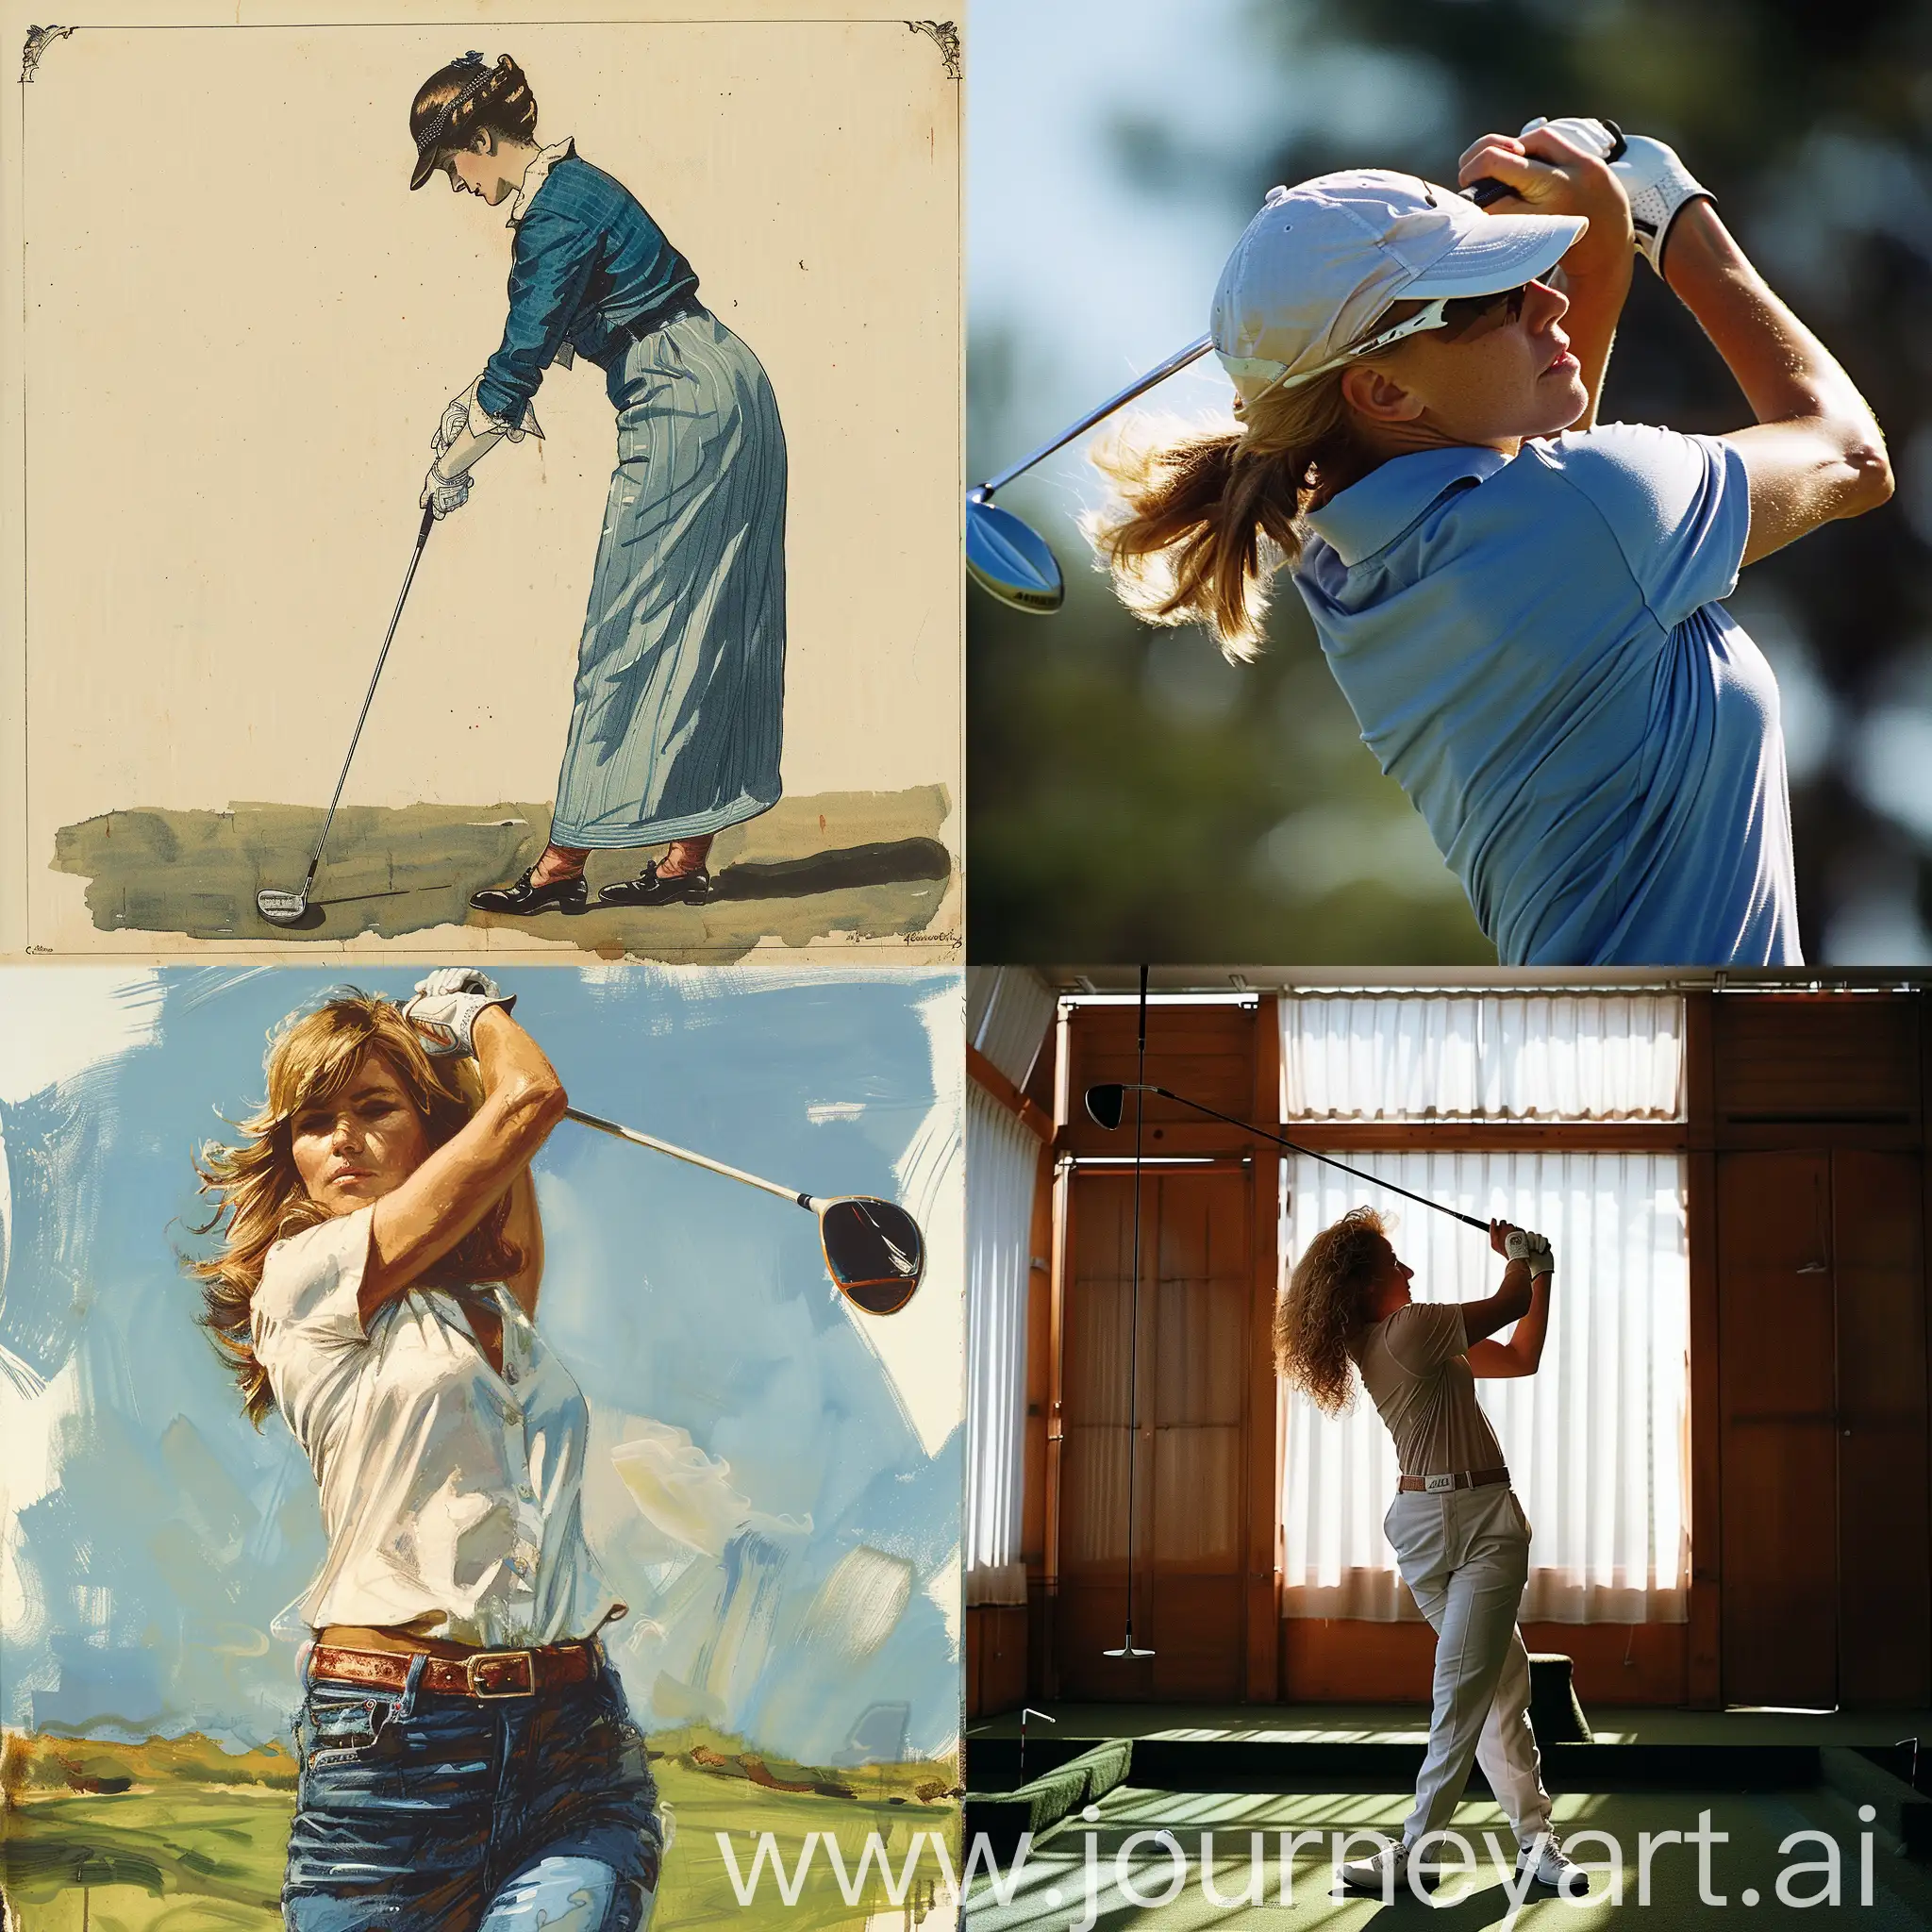 Elegant-Woman-Perfecting-her-Golf-Swing-in-a-Vibrant-Setting